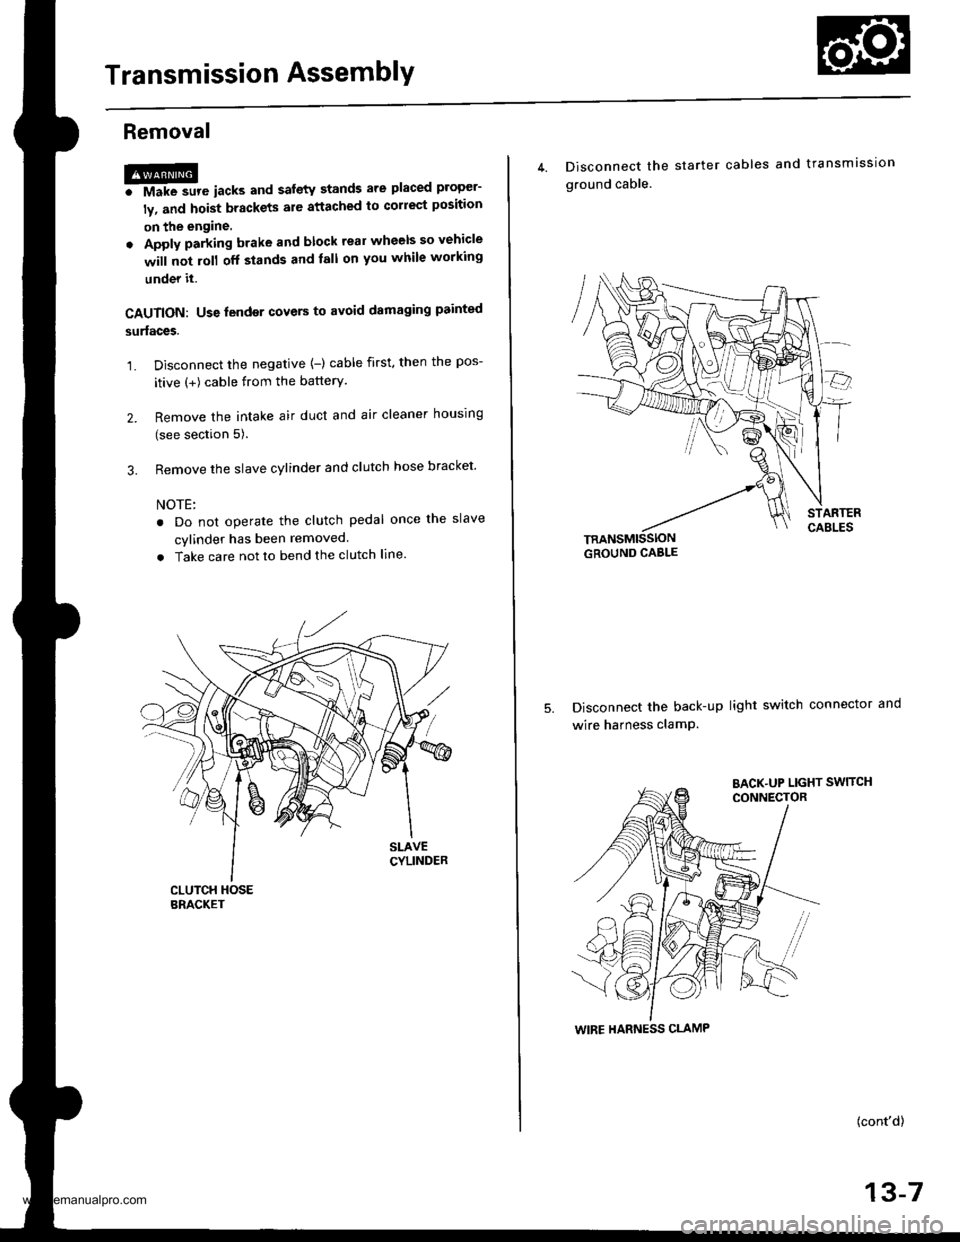 HONDA CR-V 2000 RD1-RD3 / 1.G Service Manual 
Transmission AssemblY
Removal
@FMak. sw. iack" and safety stands are placed propel-
ly, and hoist brackets are attached to collect position
on the engine,
. Apply parking brake and block rear wheels 